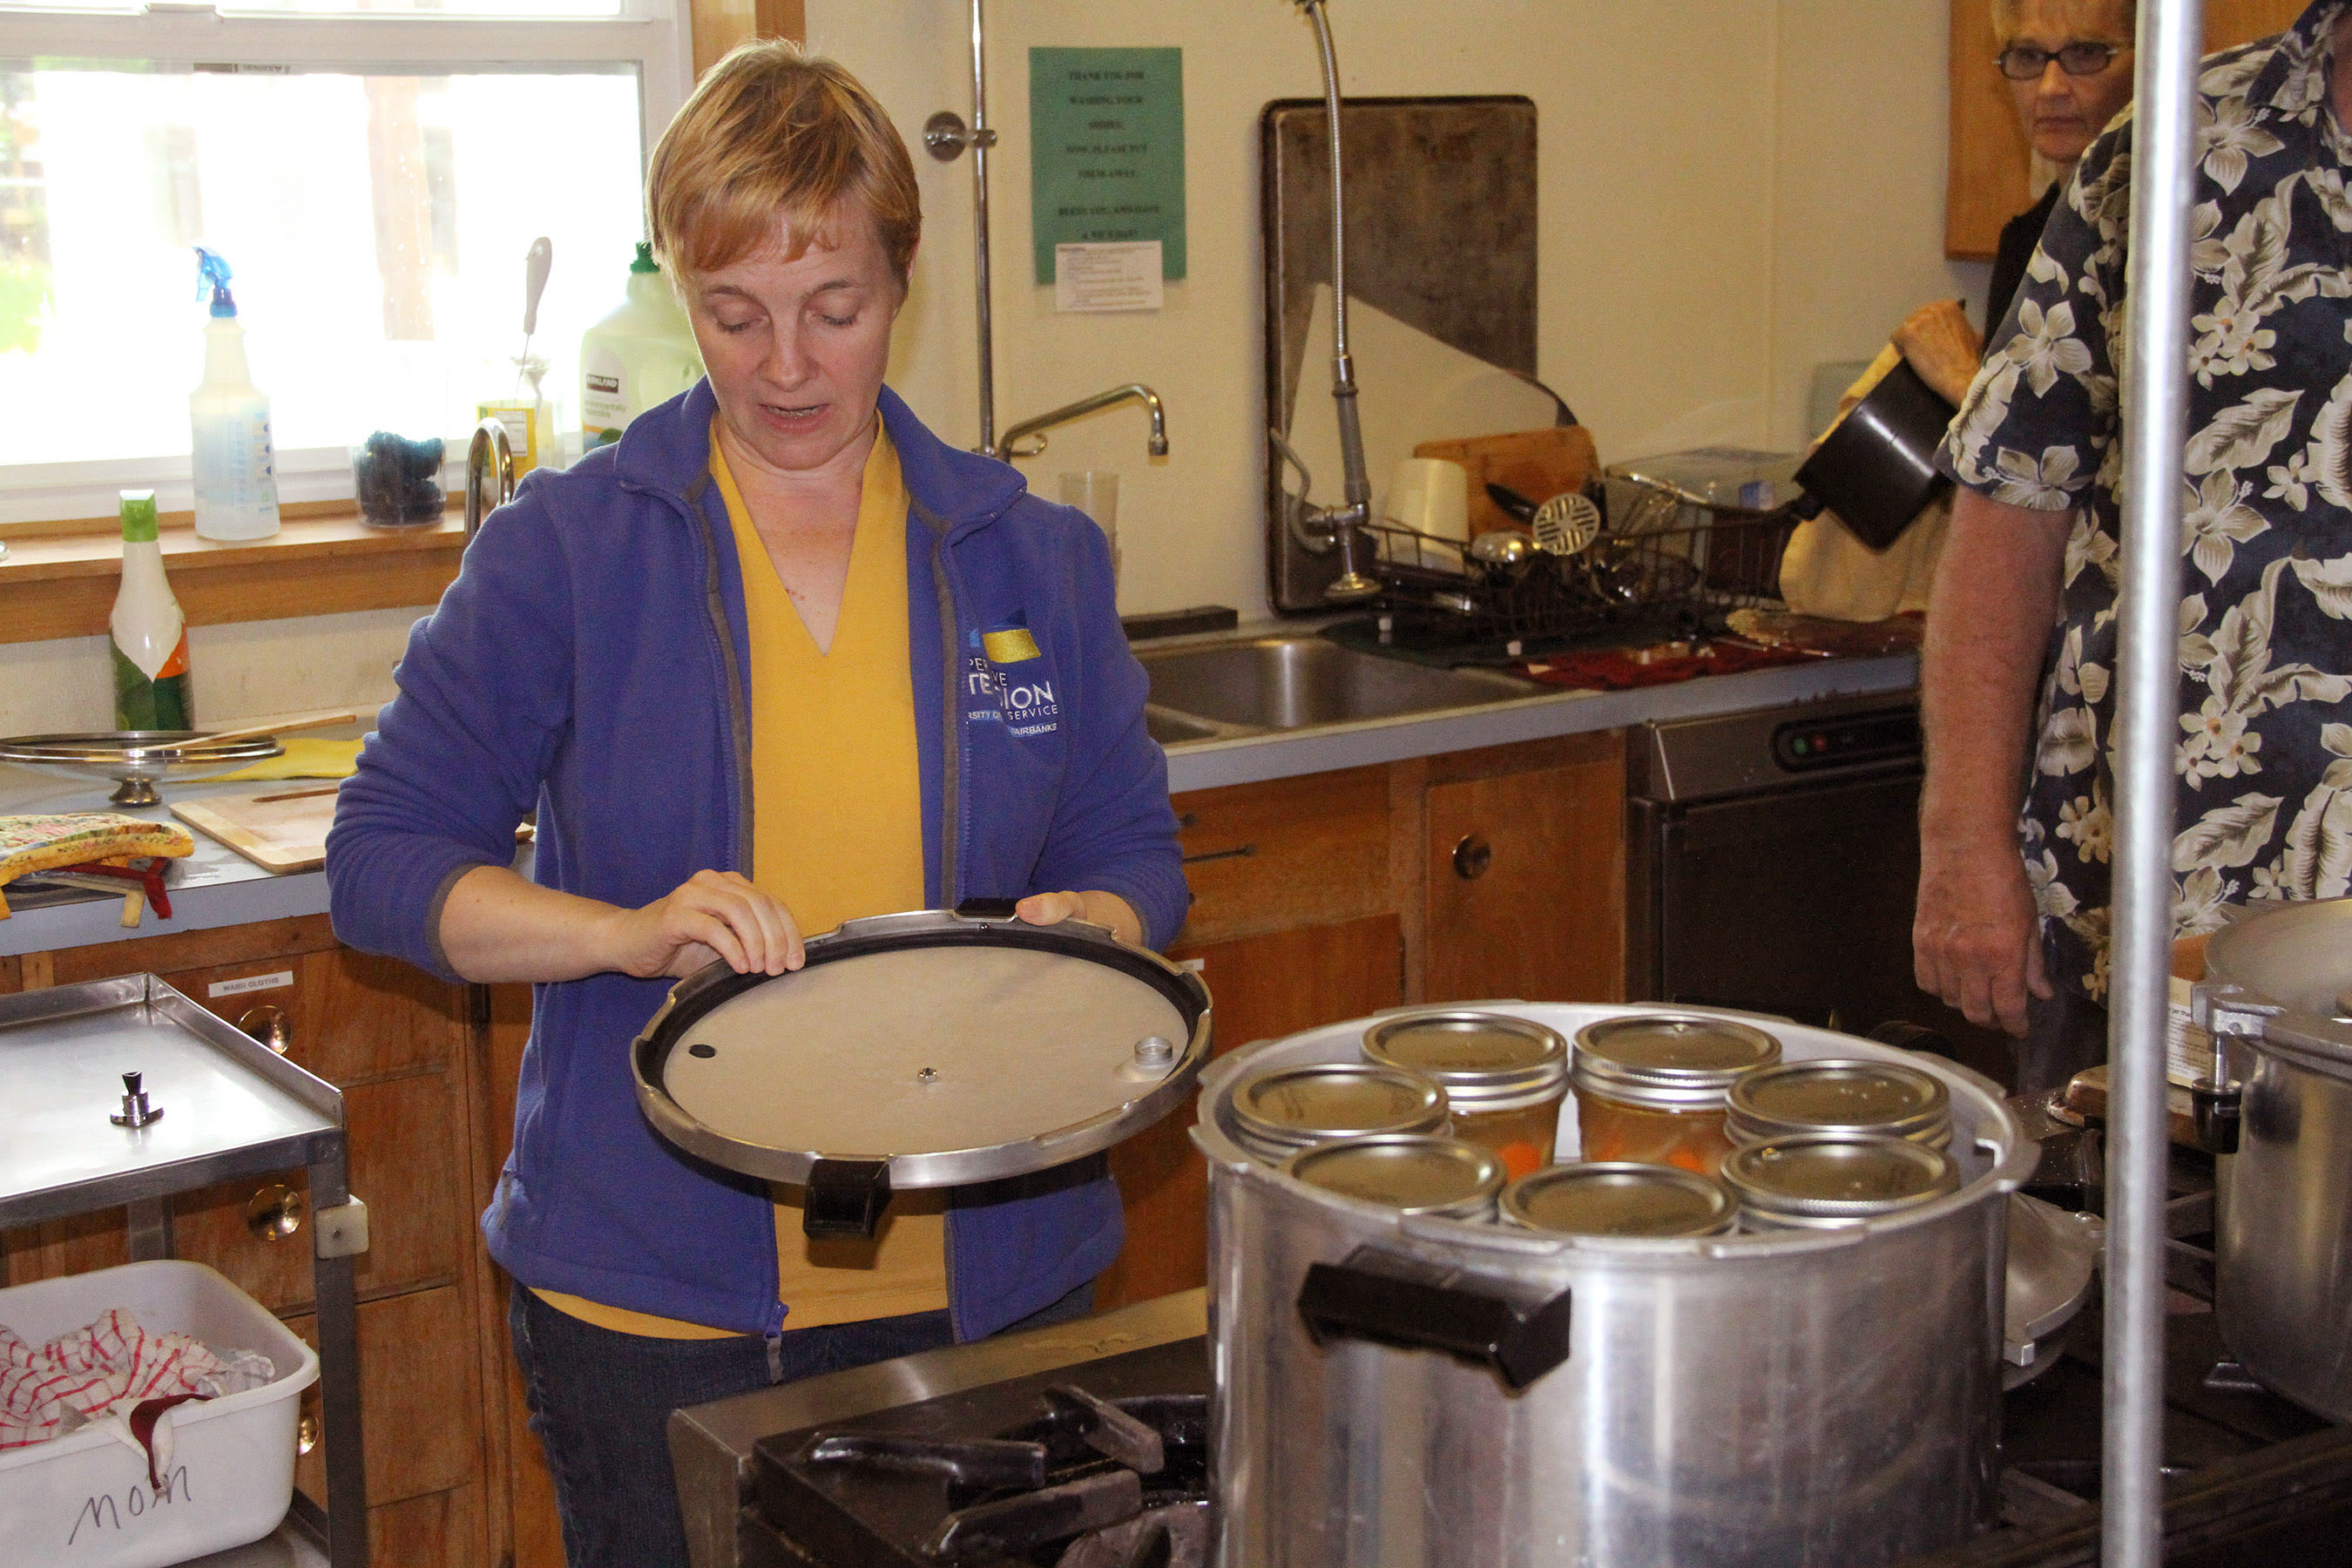 Sarah Lewis teachings about pressure canning